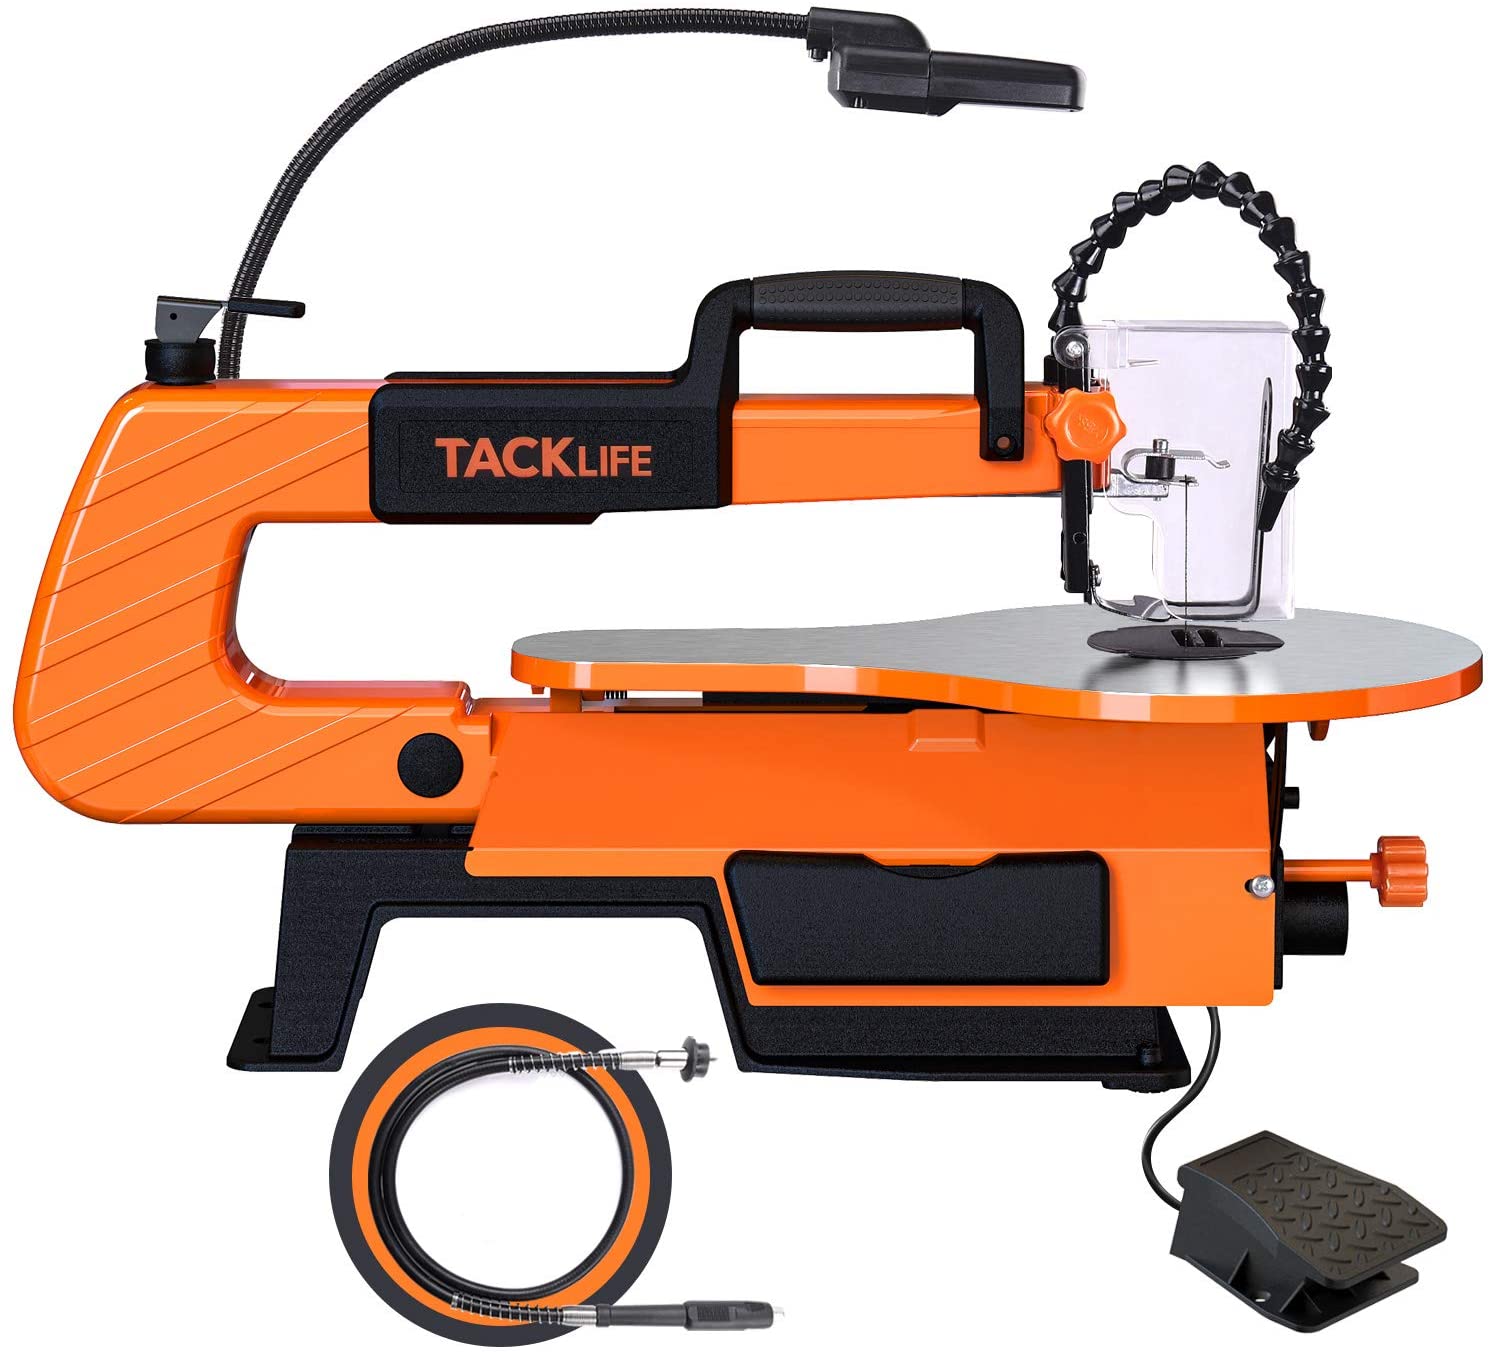 TACKLIFE TLSS01A Variable Speed Scroll Saw